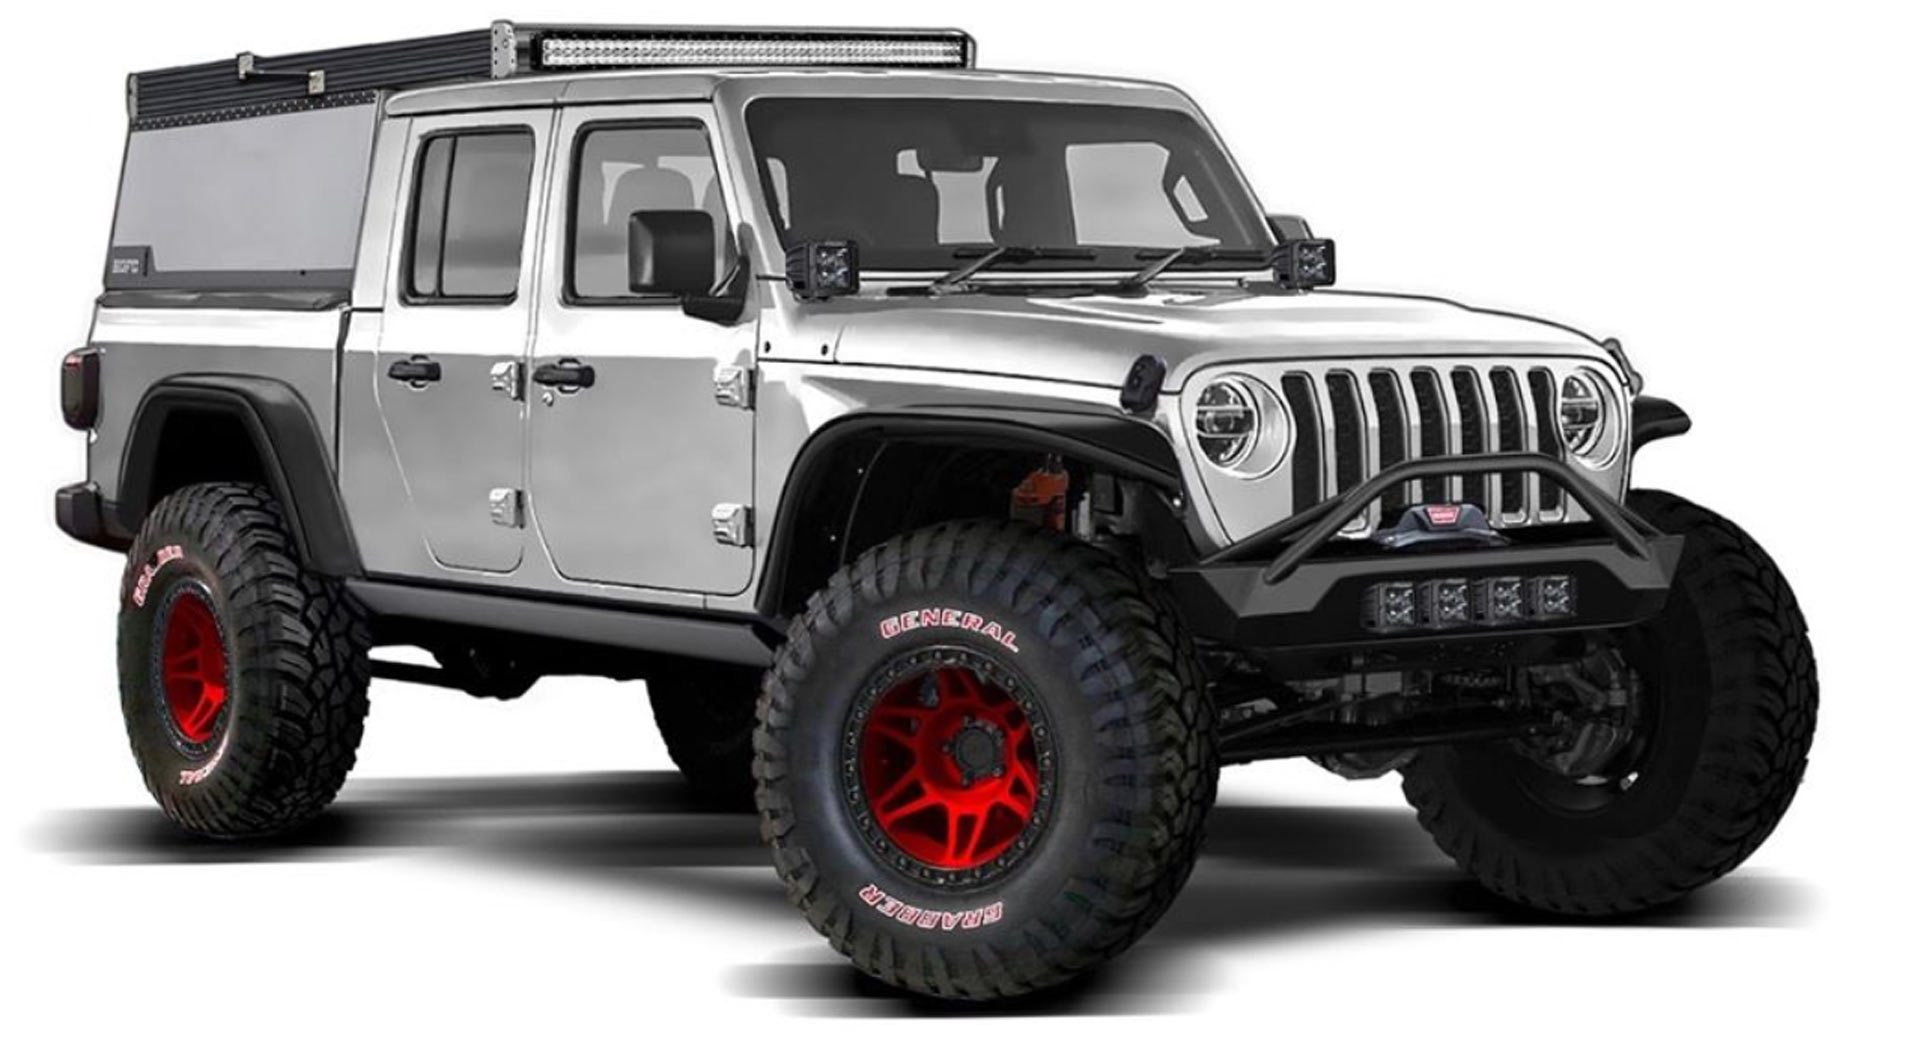 Check Out Jeep's Gladiator Truck Rendered With A Bunch Of ...